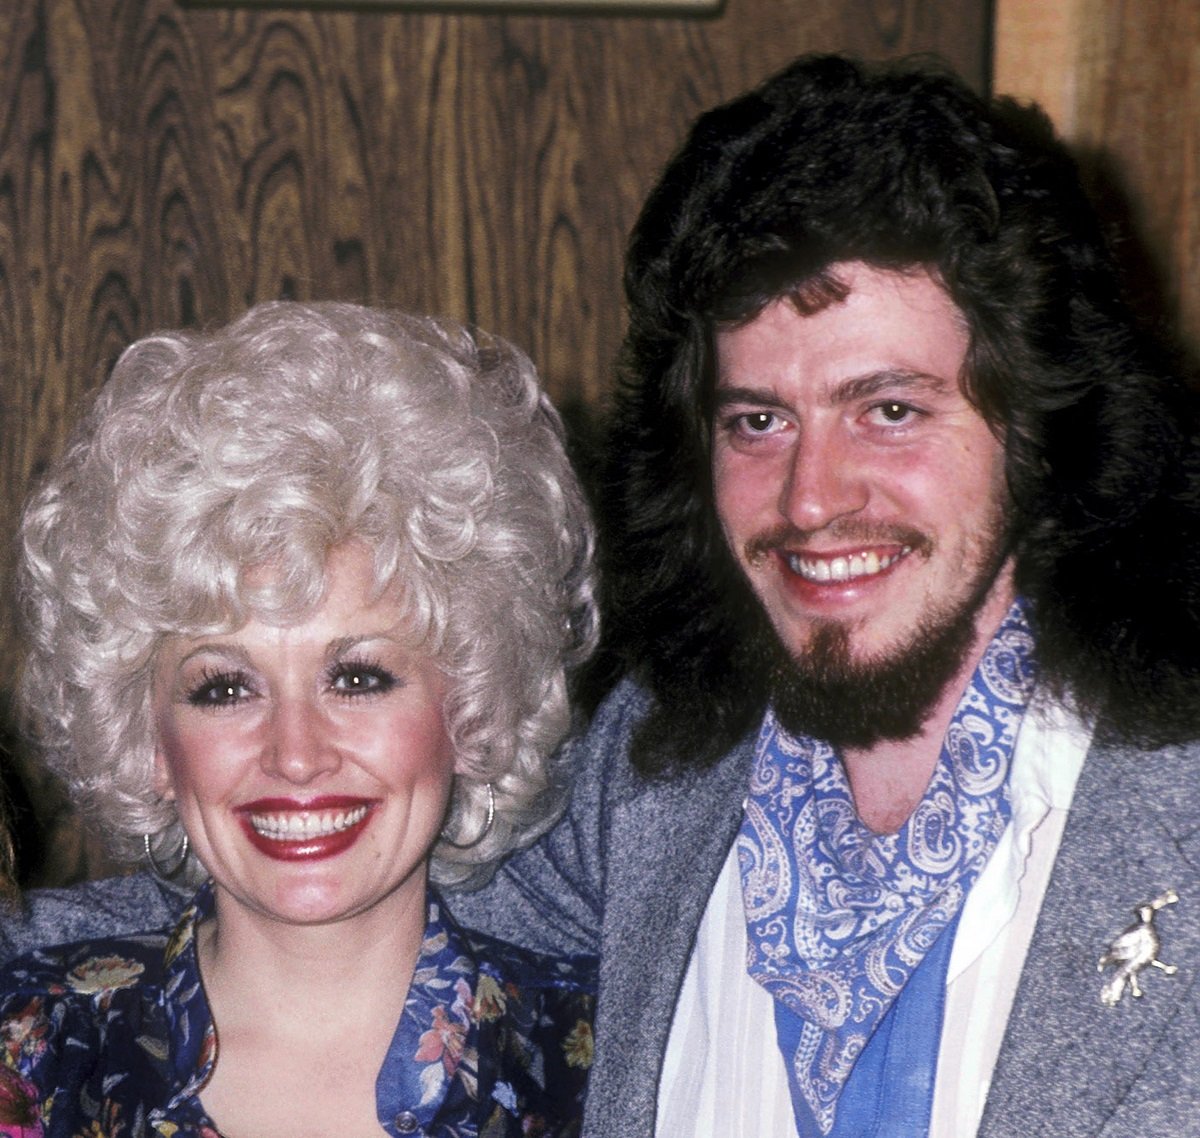 Dolly Parton and her brother Floyd Parton together in a recording studio